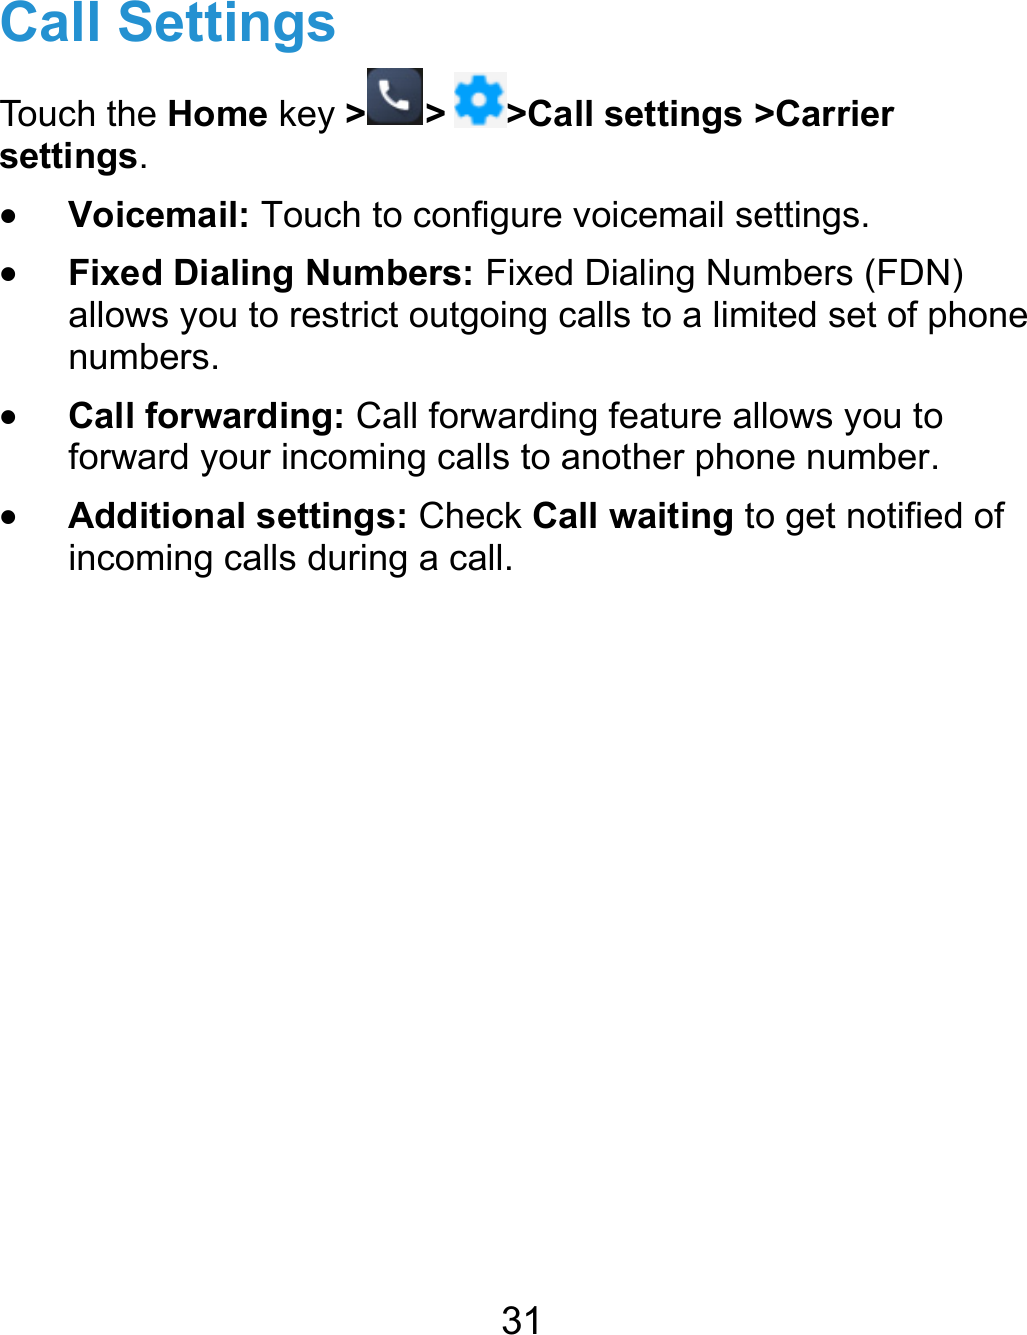  31 Call Settings Touch the Home key &gt; &gt; &gt;Call settings &gt;Carrier settings.  Voicemail: Touch to configure voicemail settings.  Fixed Dialing Numbers: Fixed Dialing Numbers (FDN) allows you to restrict outgoing calls to a limited set of phone numbers.  Call forwarding: Call forwarding feature allows you to forward your incoming calls to another phone number.  Additional settings: Check Call waiting to get notified of incoming calls during a call. 